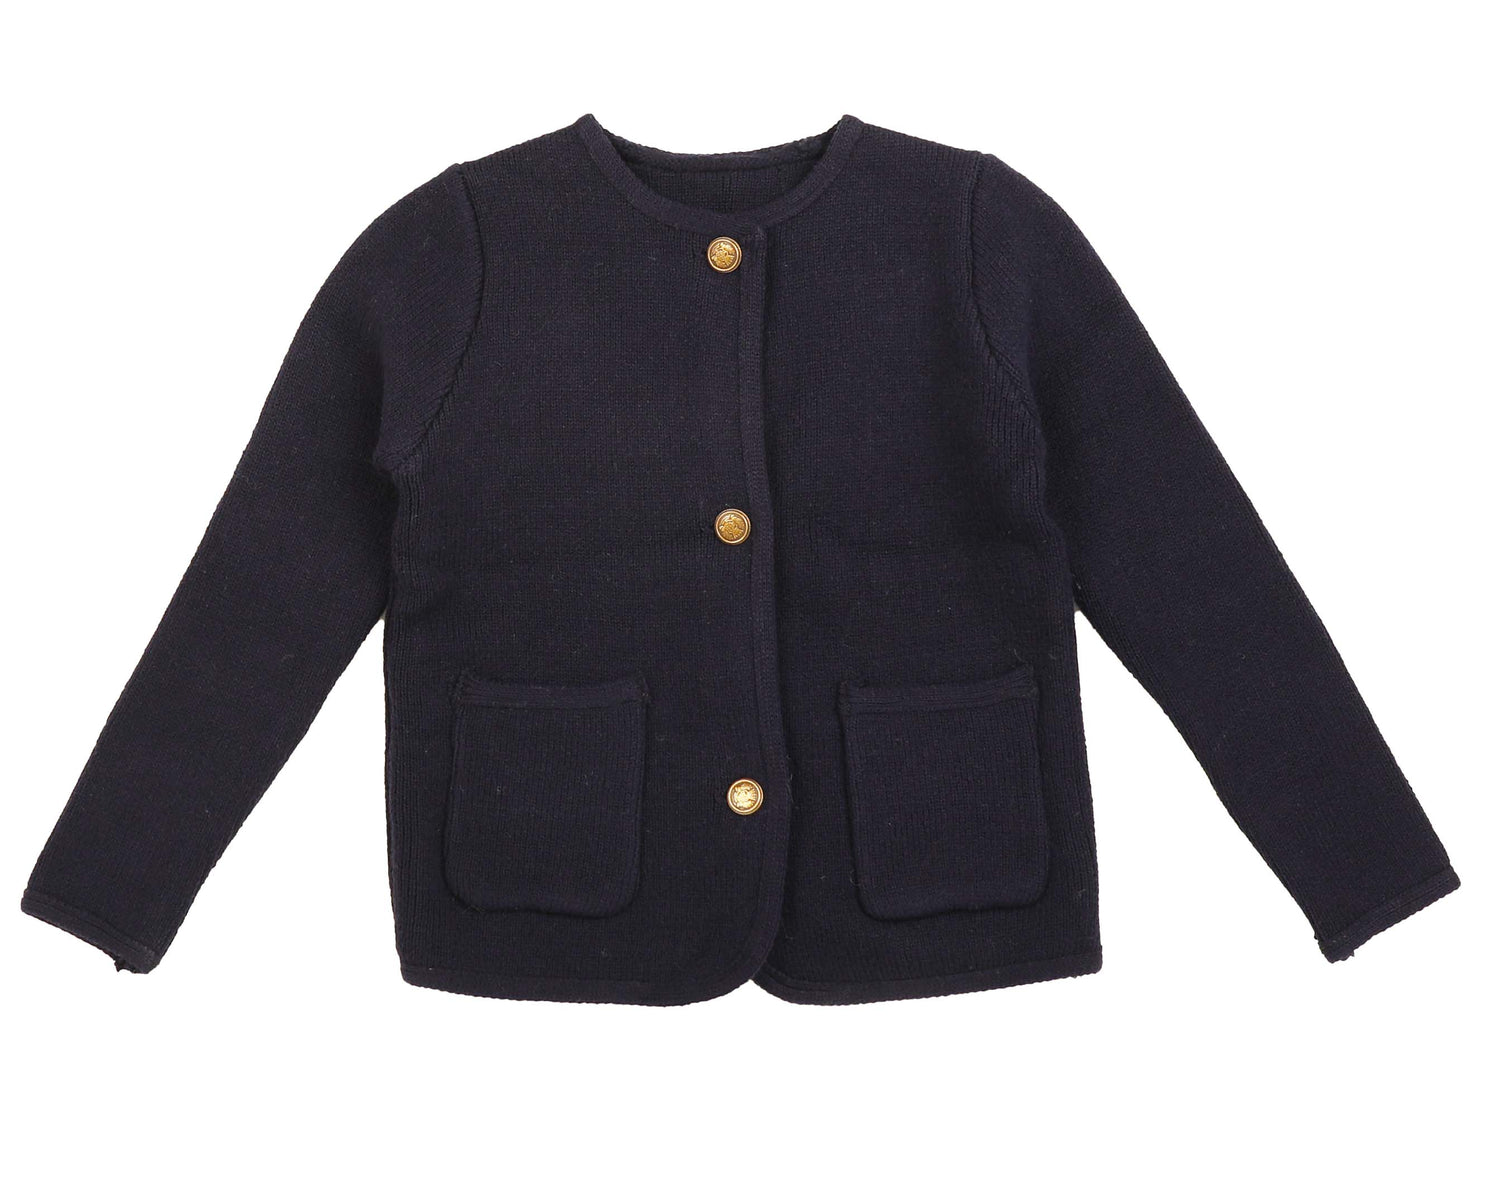 Noma Black Knit Jacket with Gold Buttons